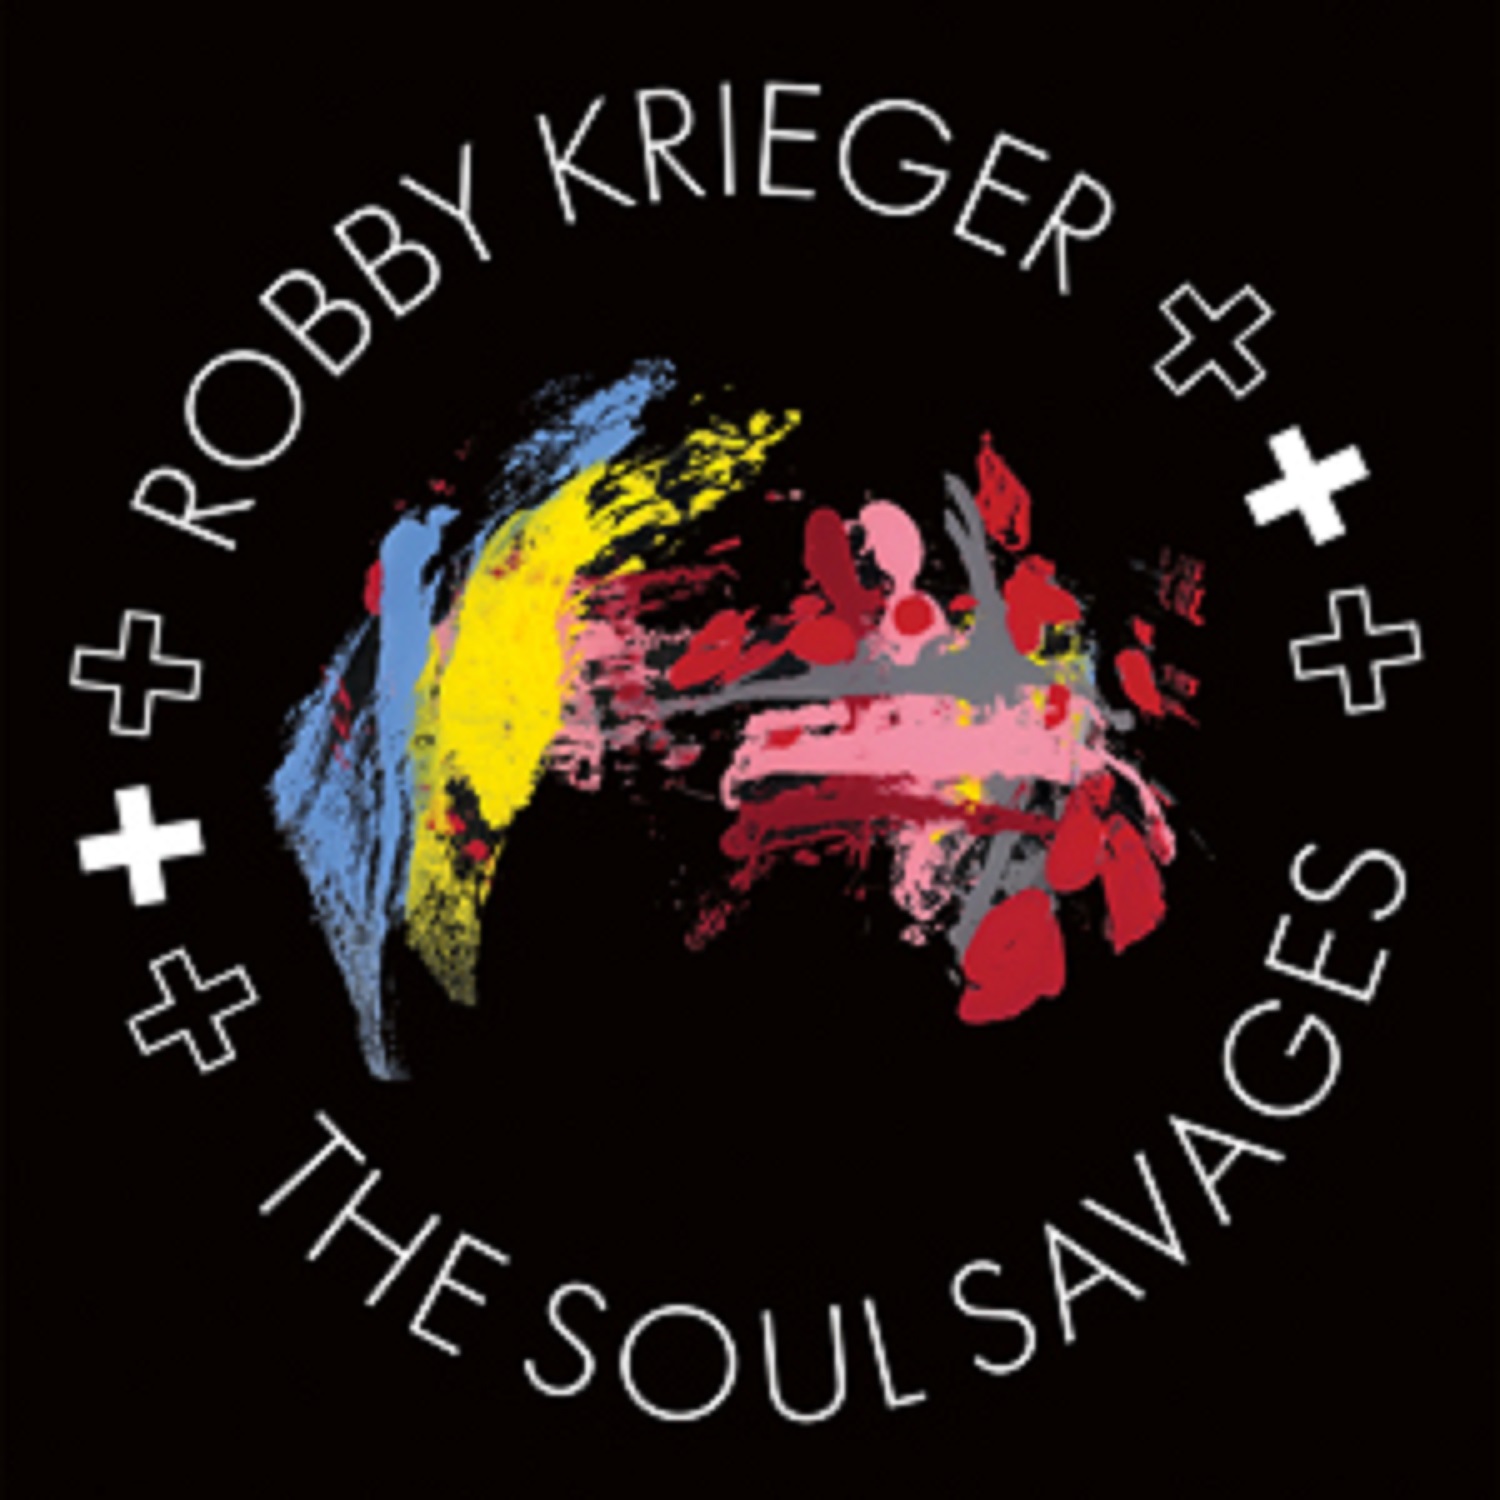 ROBBY KRIEGER AND THE SOUL SAVAGES ANNOUNCE RELEASE OF DEBUT STUDIO ALBUM